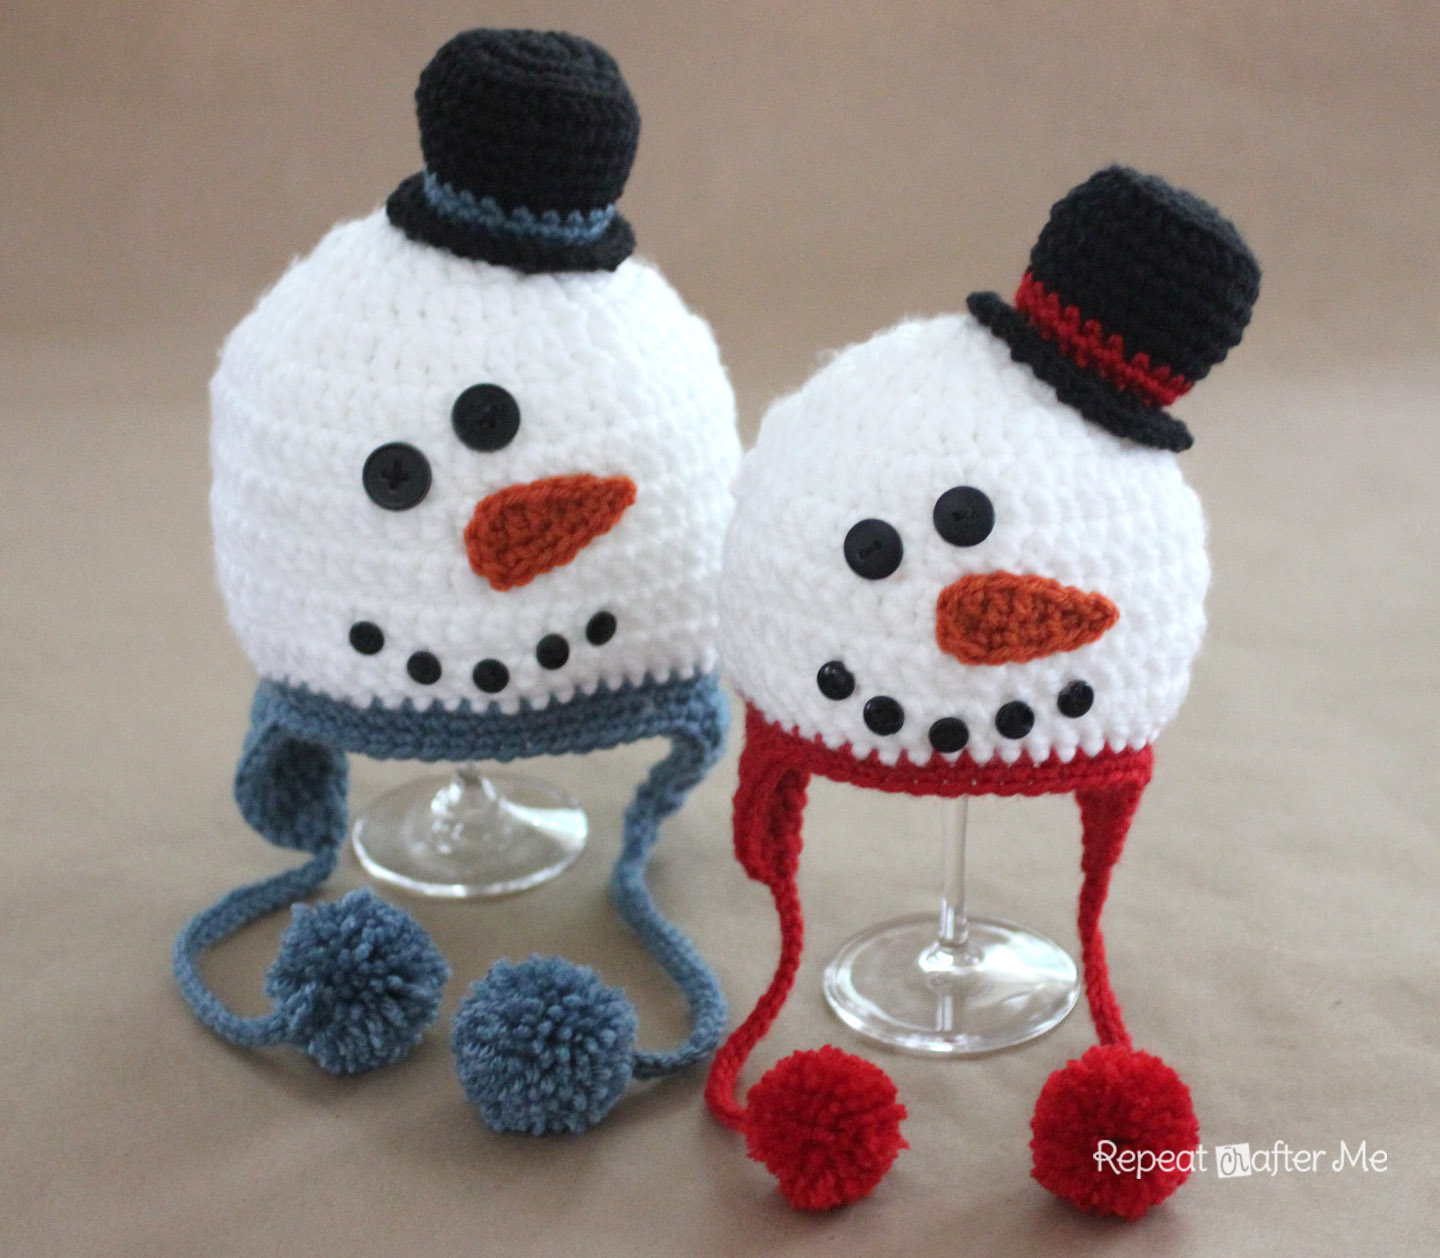 Repeat crafter me snowman hat